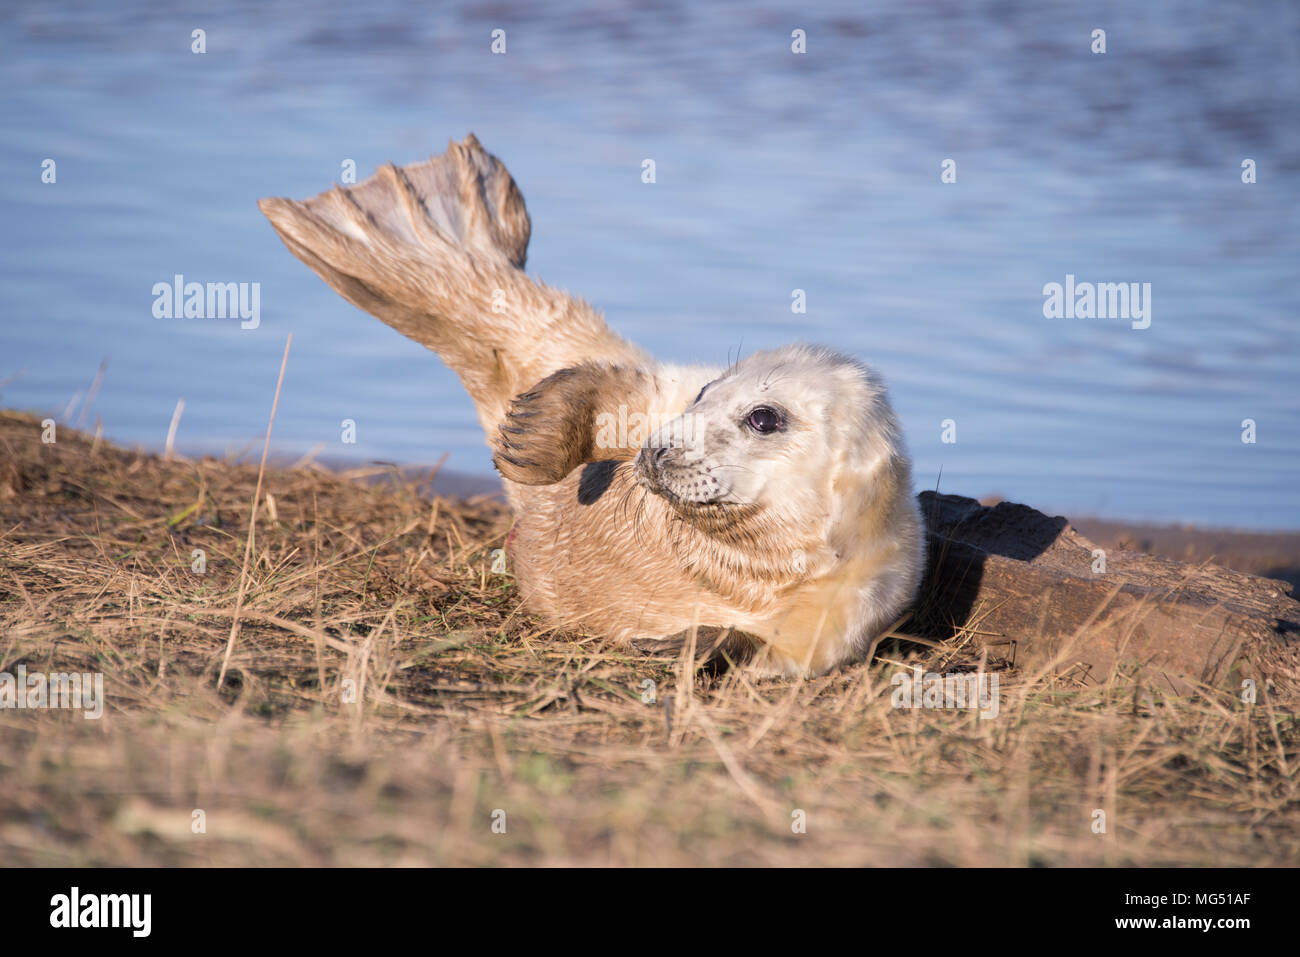 Donna Nook, Lincolnshire, UK – Nov 16: Newborn baby grey seal pup rolling about in the grass on 16 Nov 2016 at Donna Nook Seal Sanctuary, Lincolnshire Stock Photo